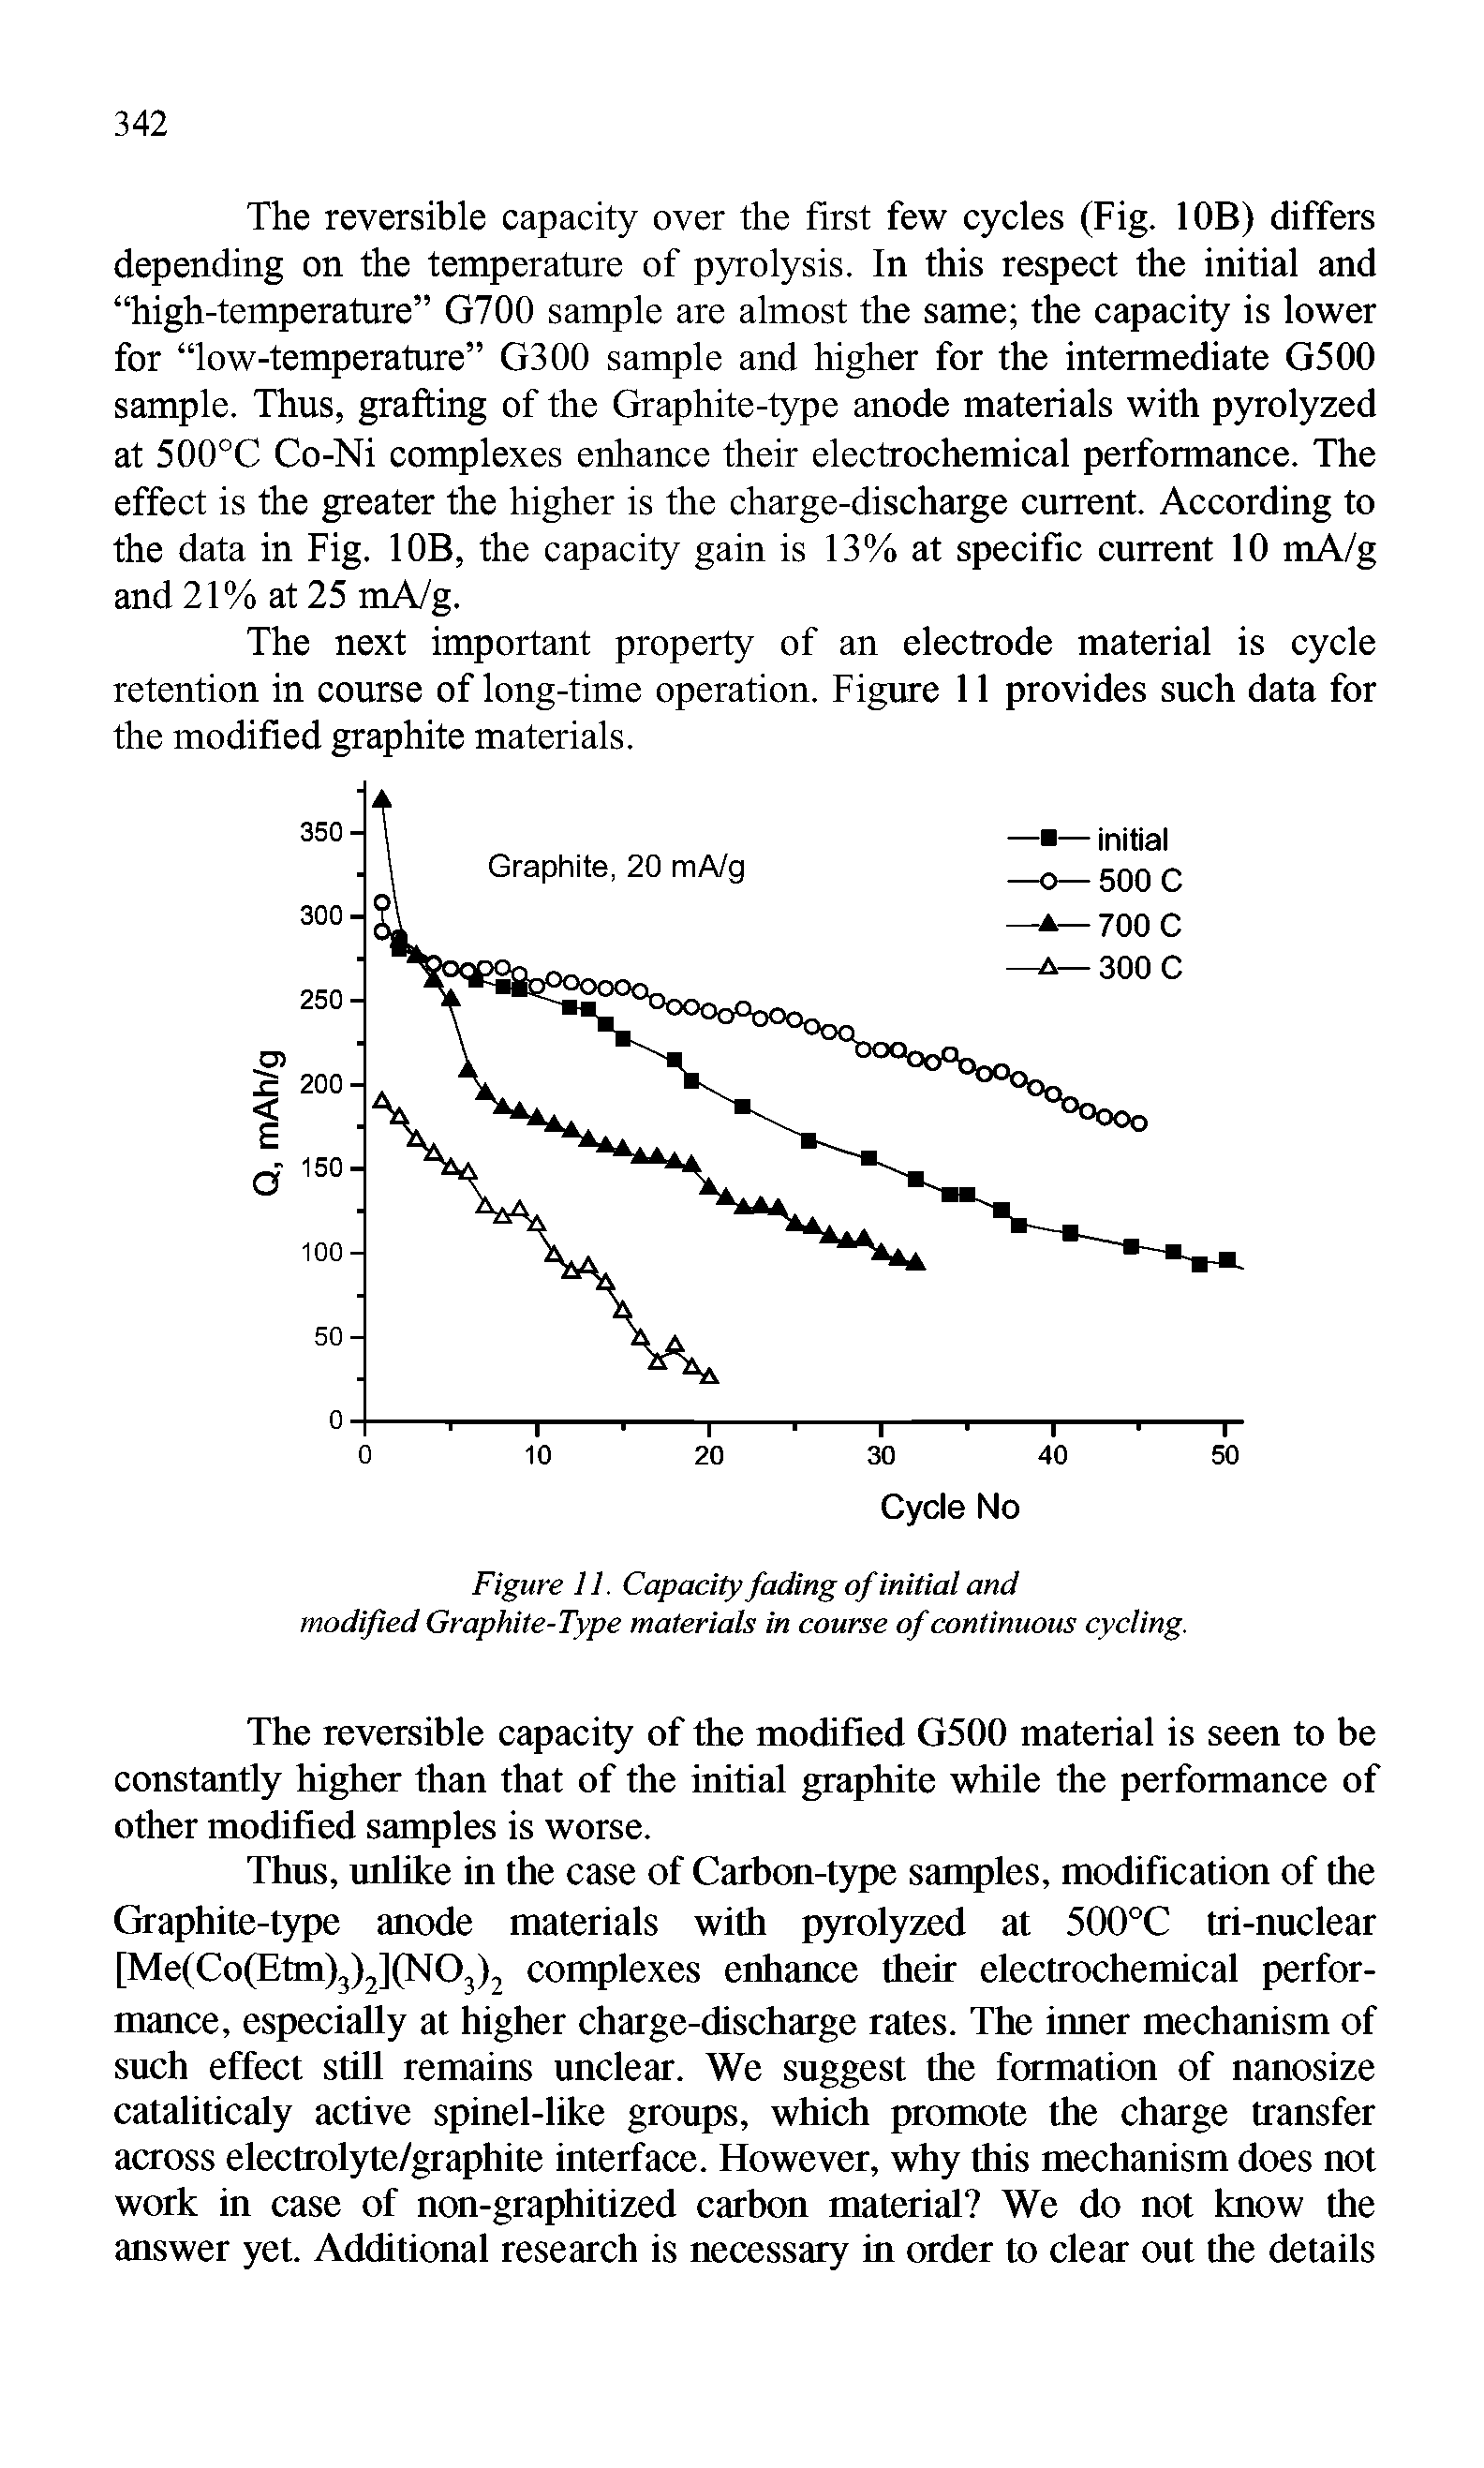 Figure 11. Capacity fading of initial and modified Graphite-Type materials in course of continuous cycling.